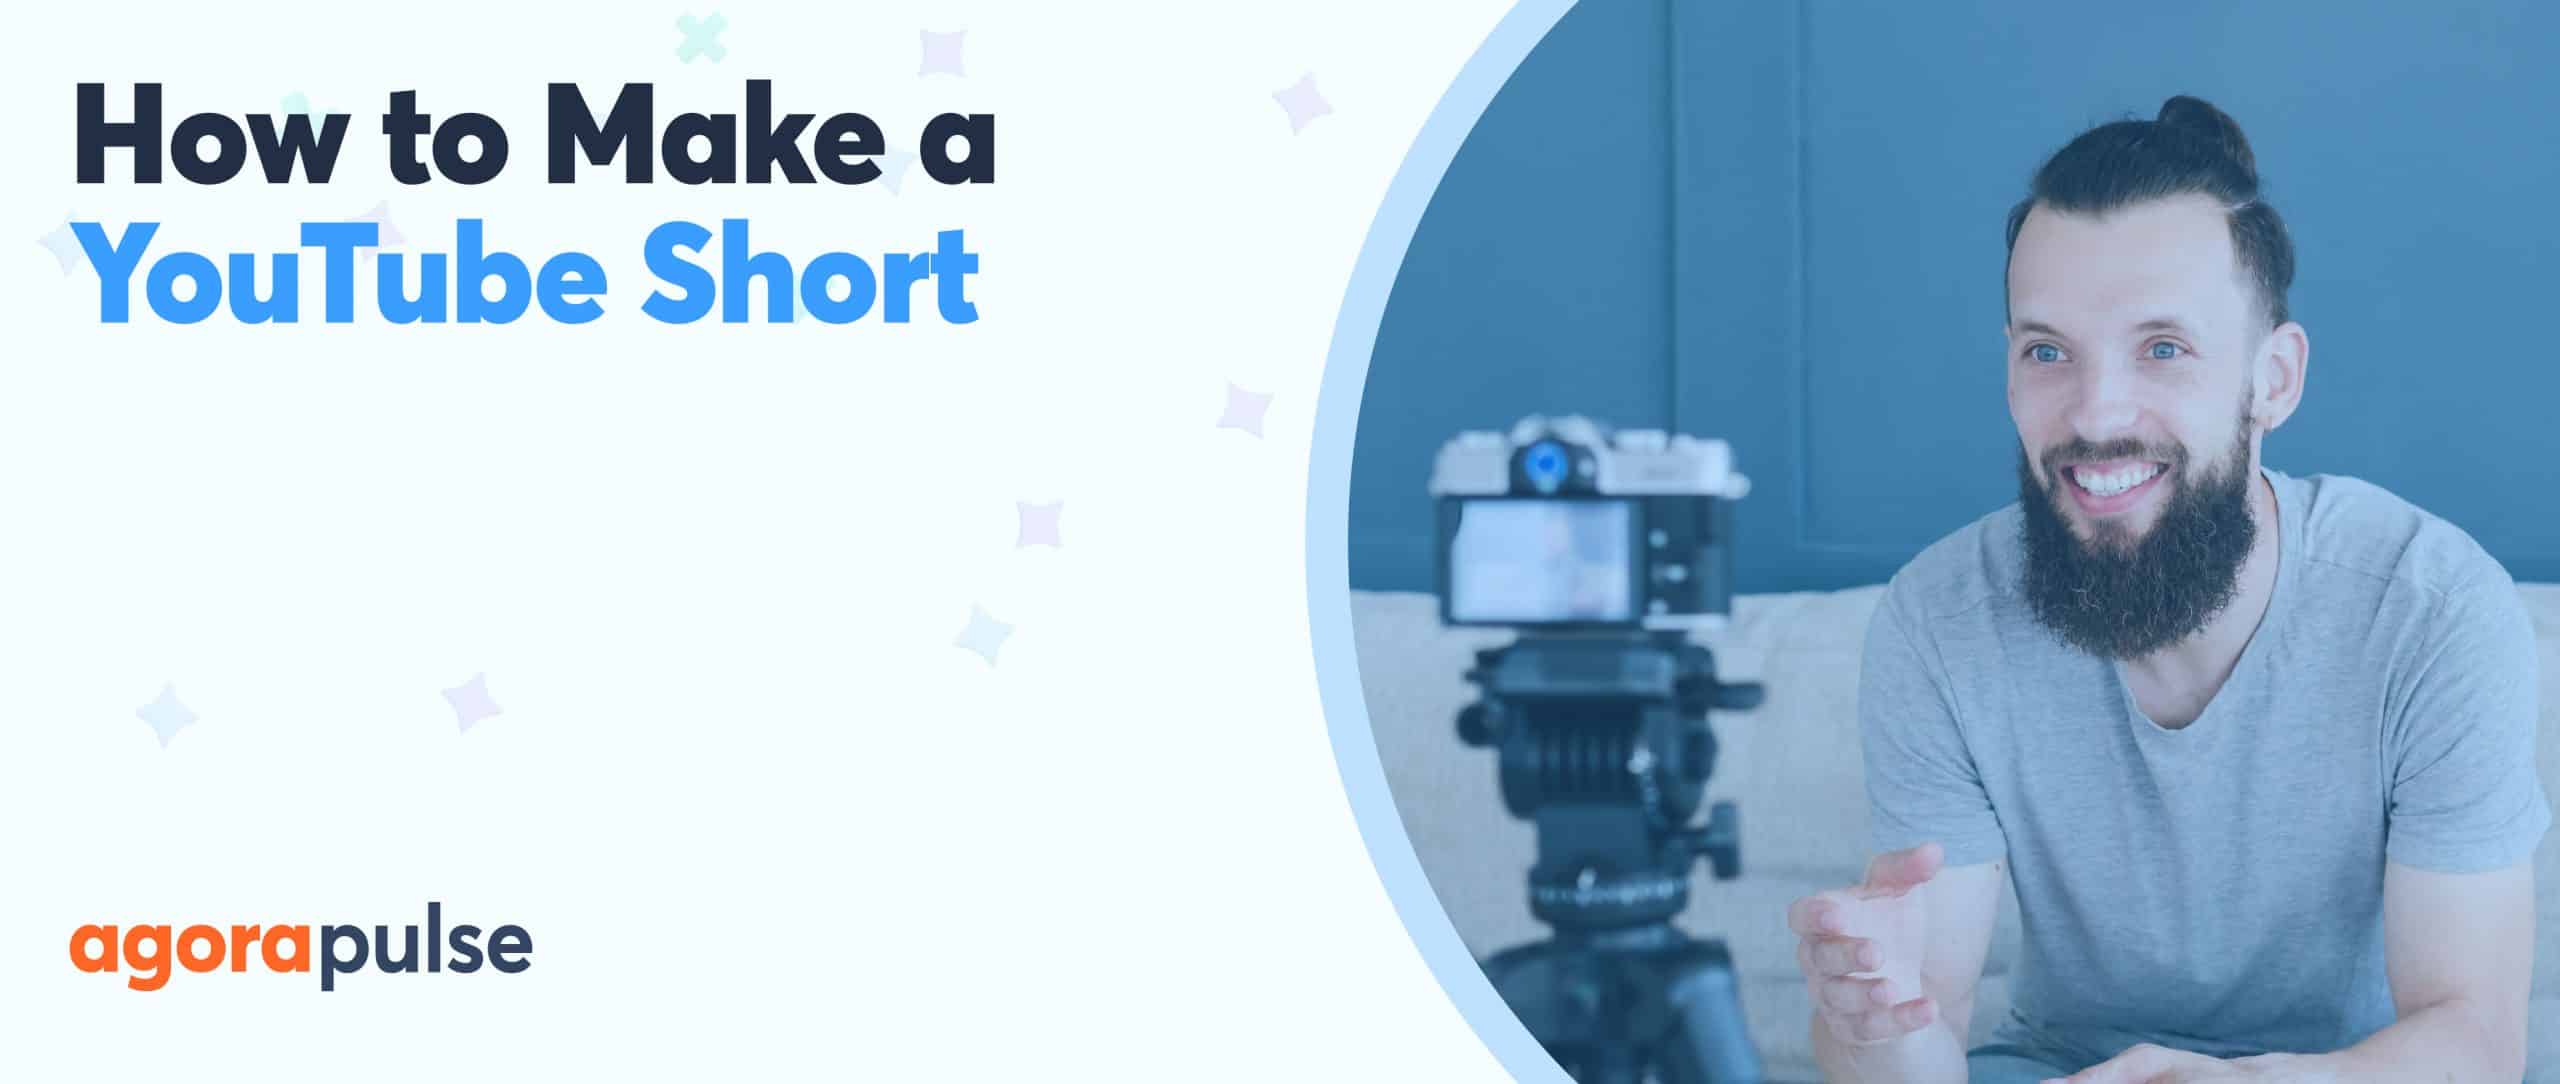 s new tool lets creators turn their own videos into Shorts